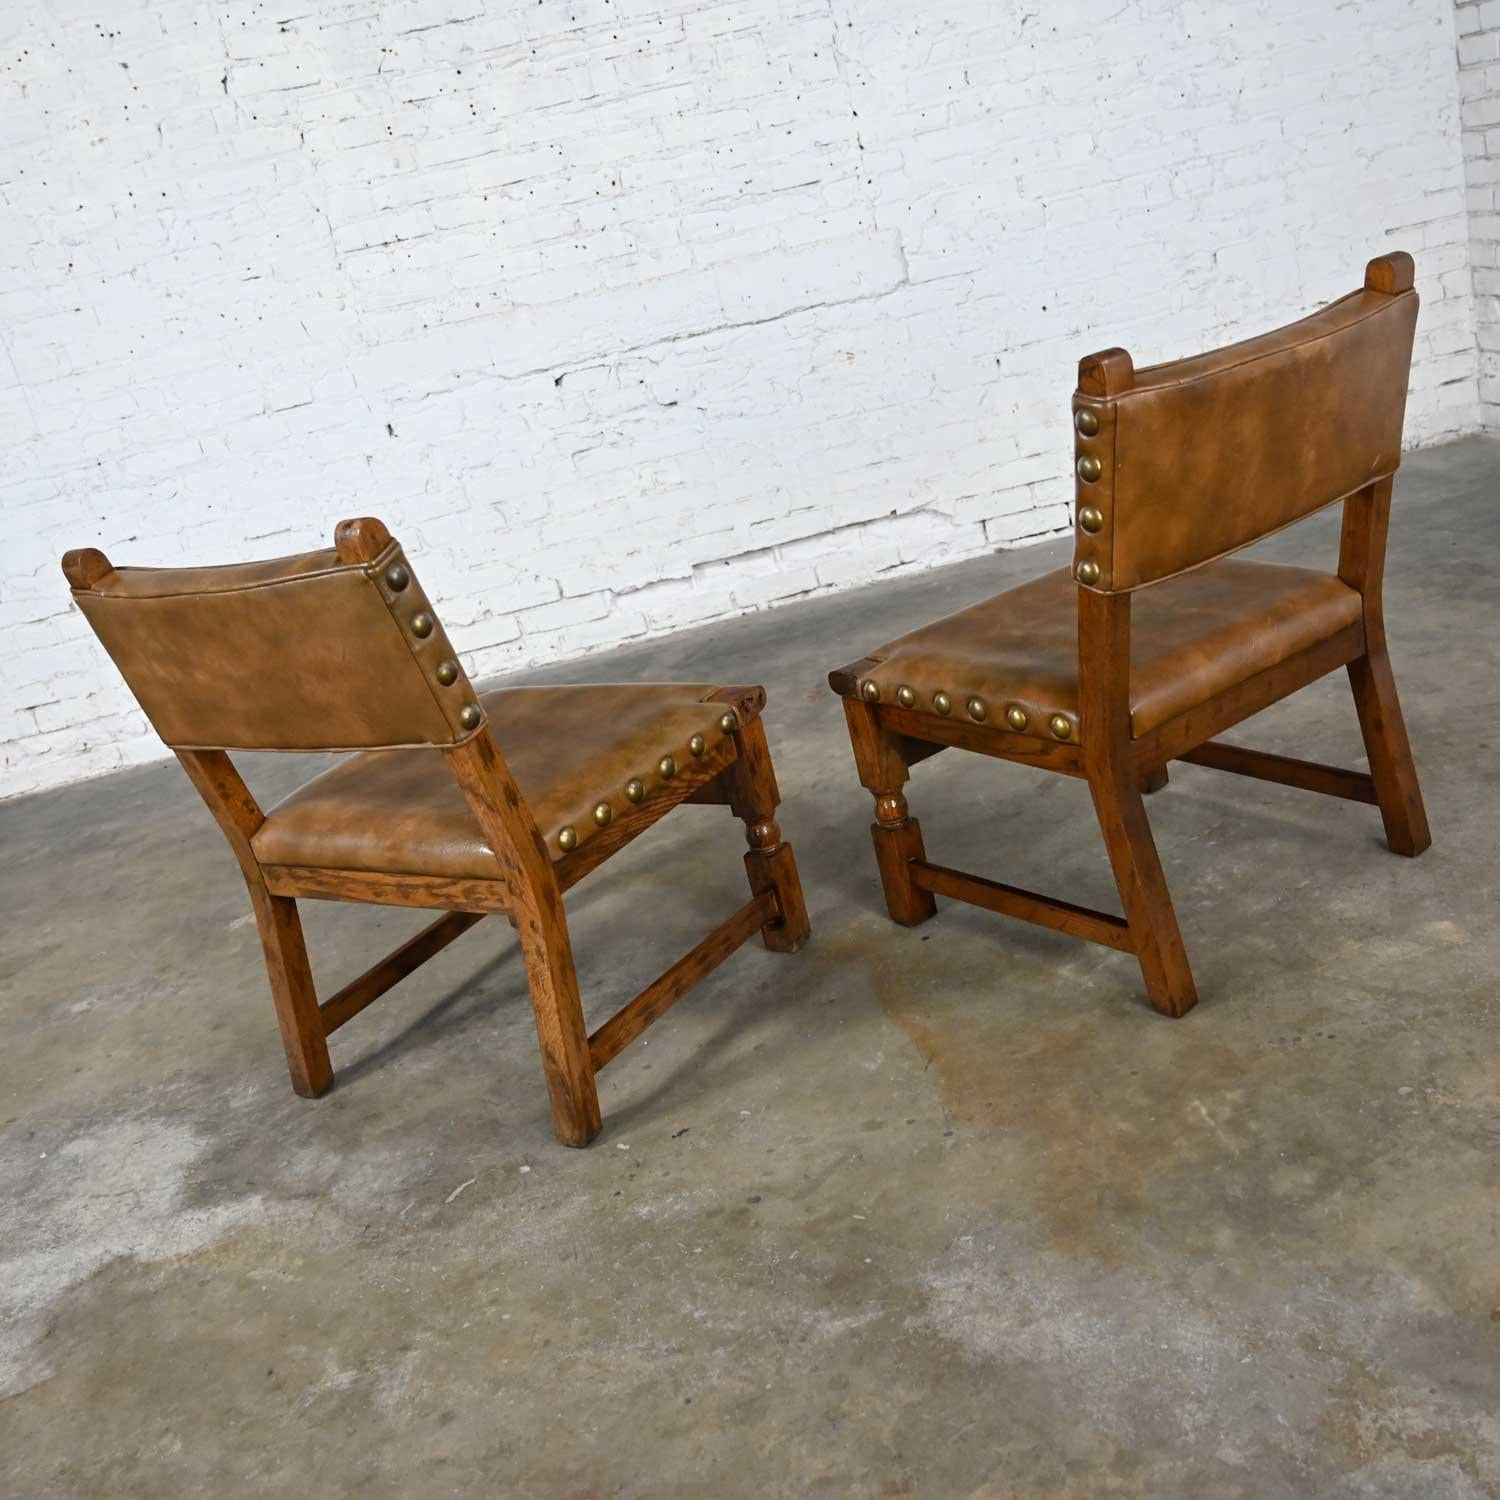 20th Century Vintage Spanish Revival Oak Pair of Chairs with Tooled Cognac Faux Leather Seat For Sale